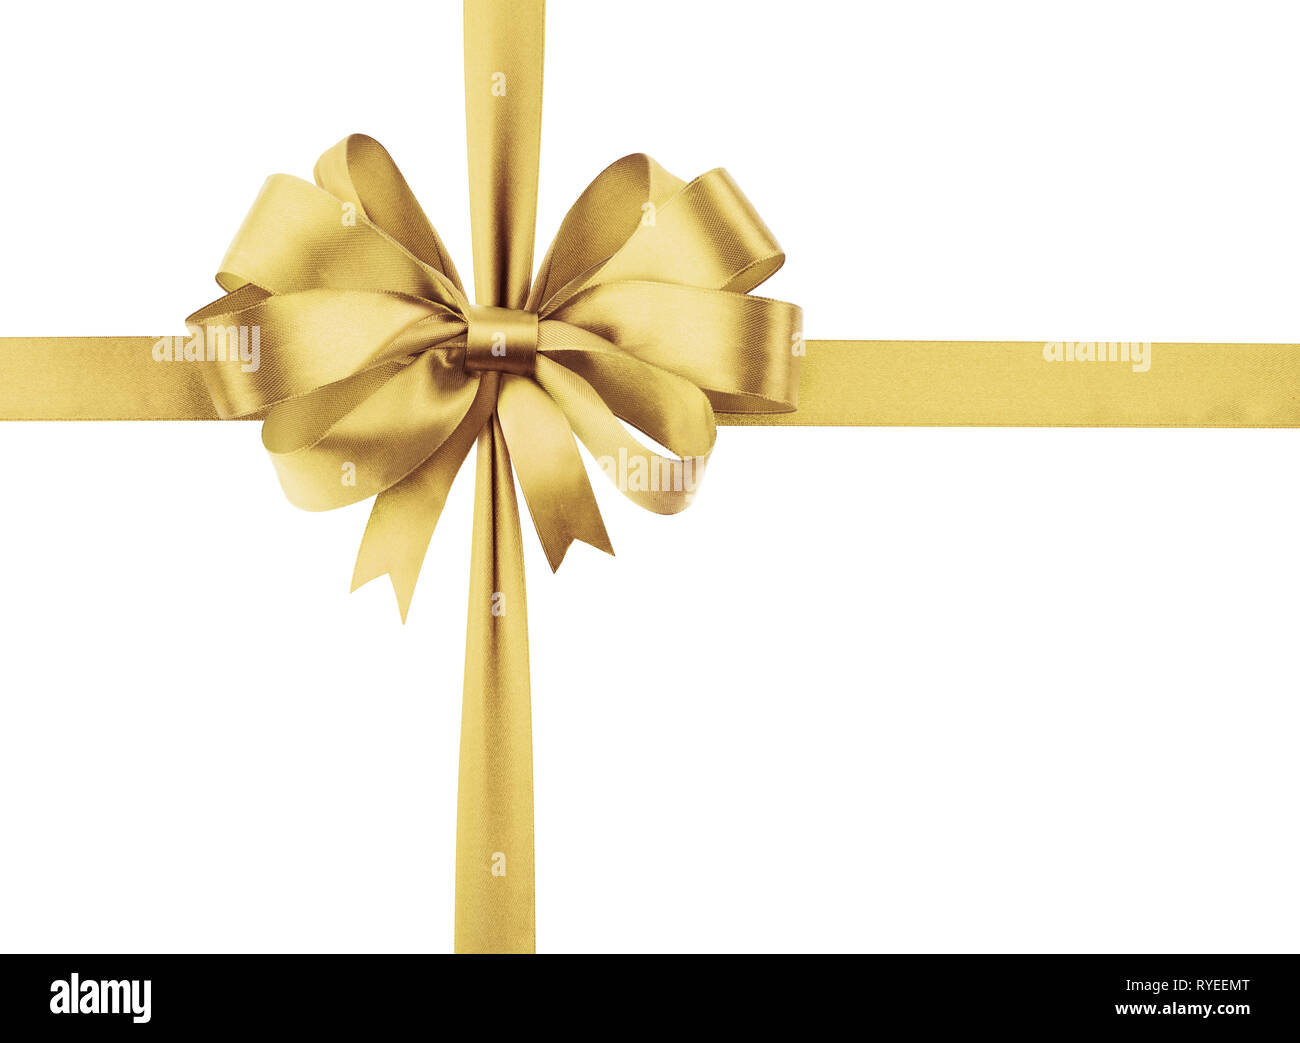 Golden sateen ribbon with bow as a gift symbol on white background. Stock Photo